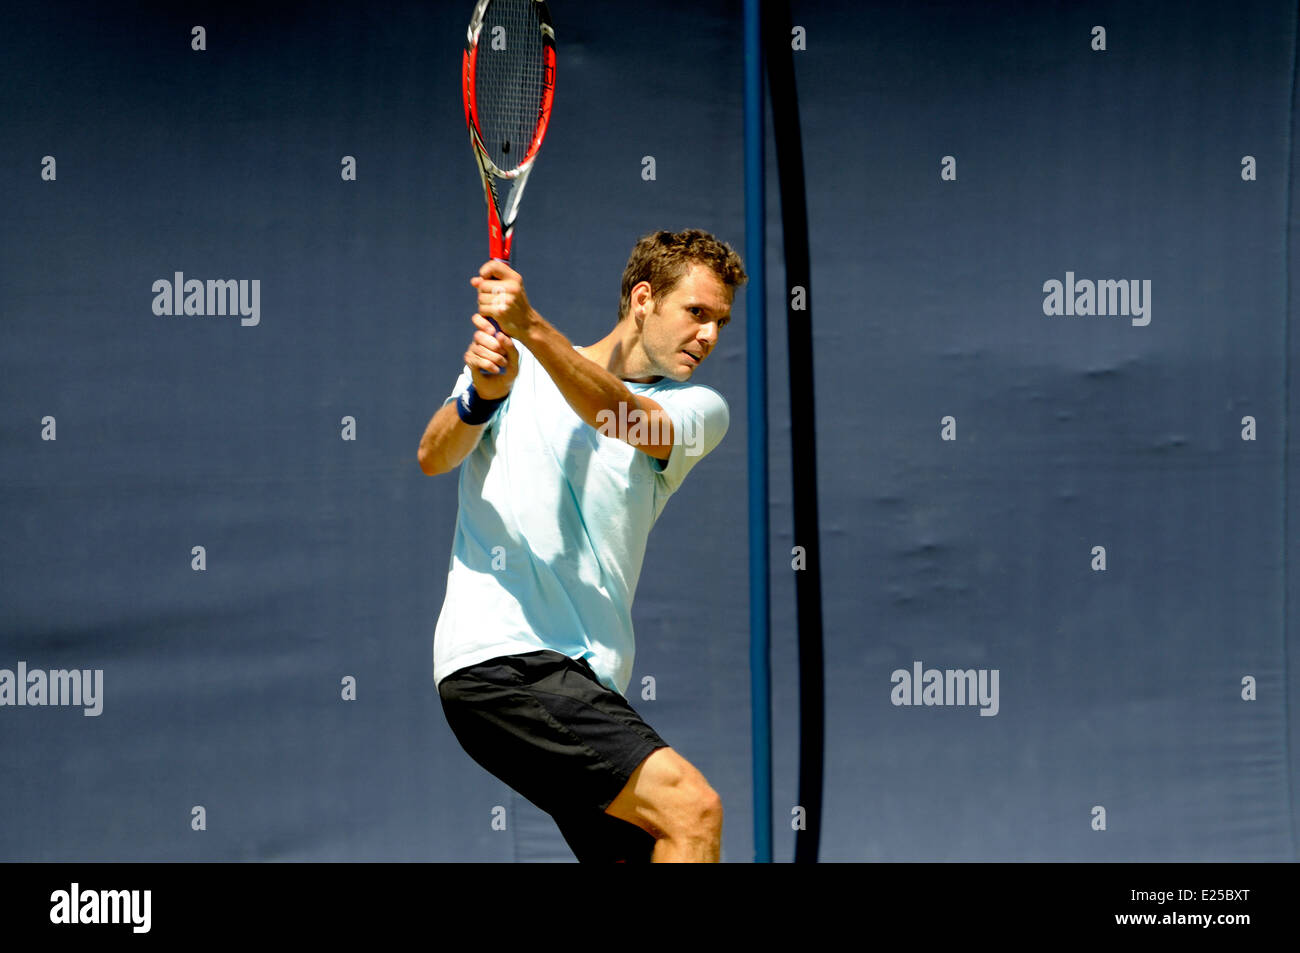 Paul-Henri Mathieu (France) on the practice courts at Queens Club, 2014 Stock Photo